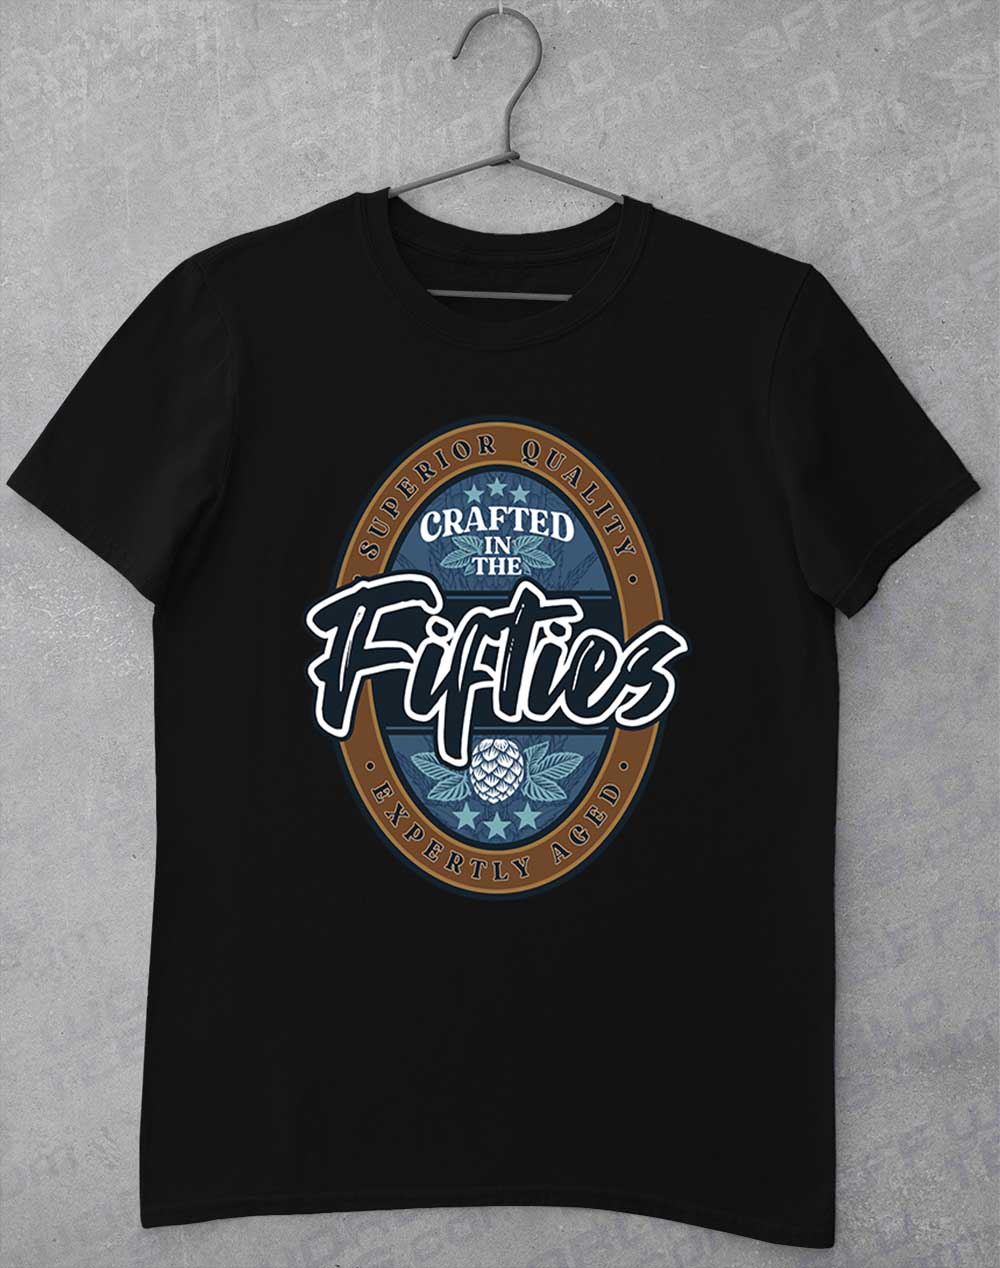 Crafted in the Fifties T-Shirt